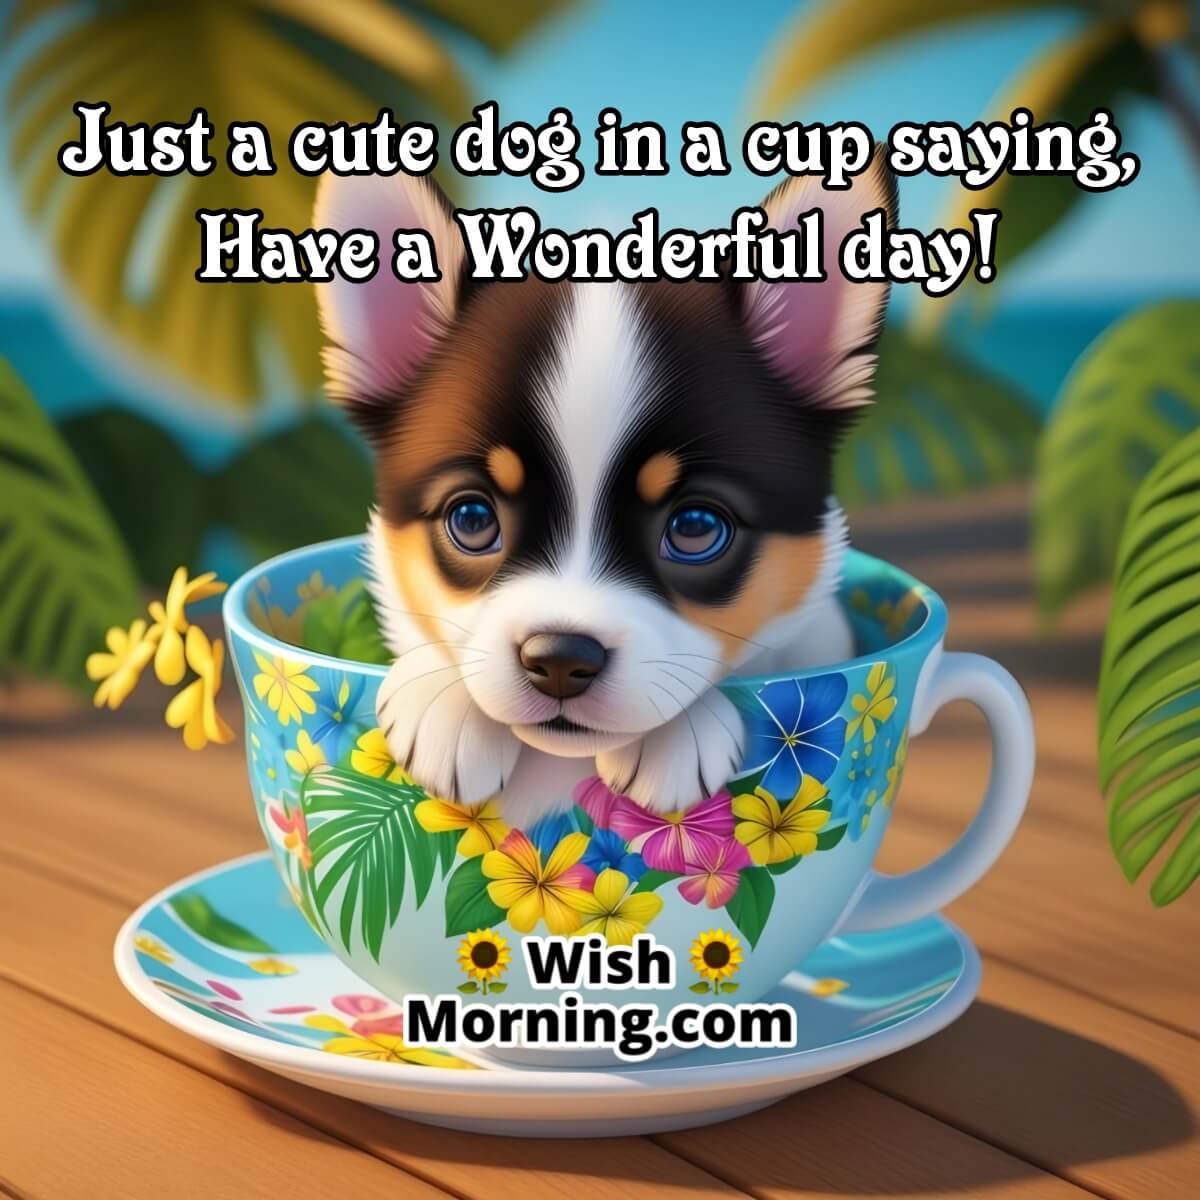 Have a Wonderful Day - Wish Morning